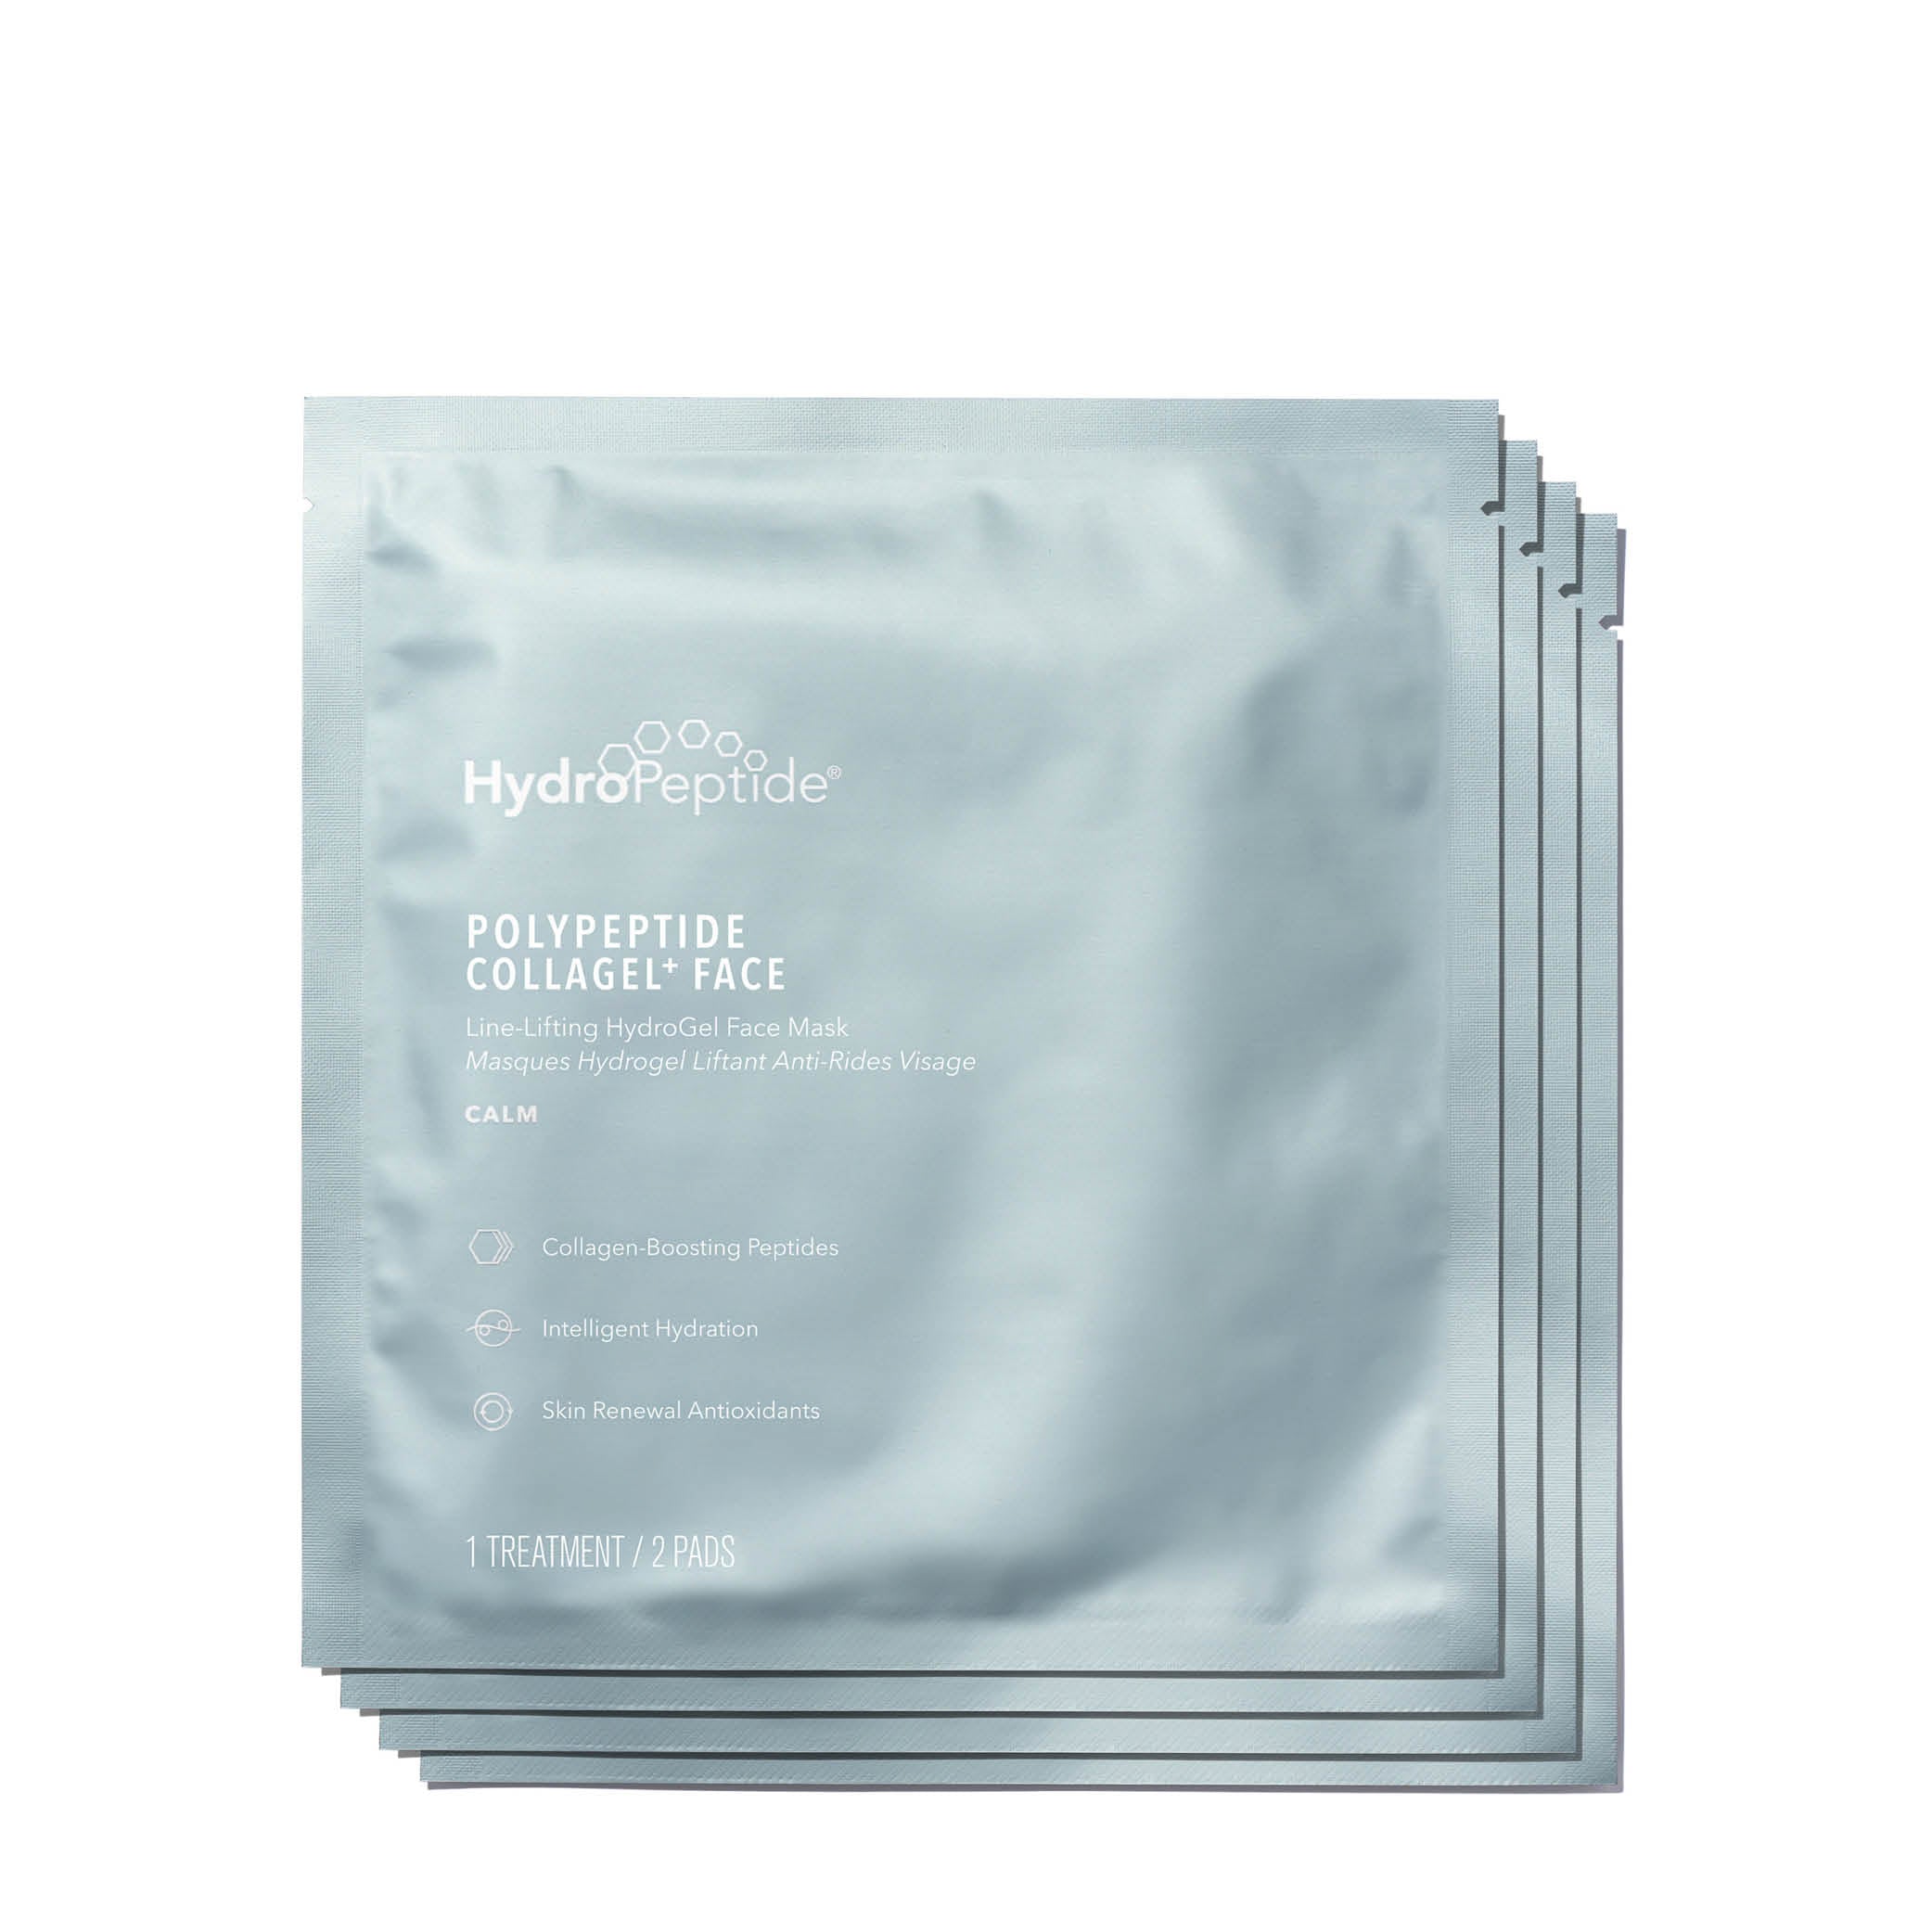 PolyPeptide Collagel For Face